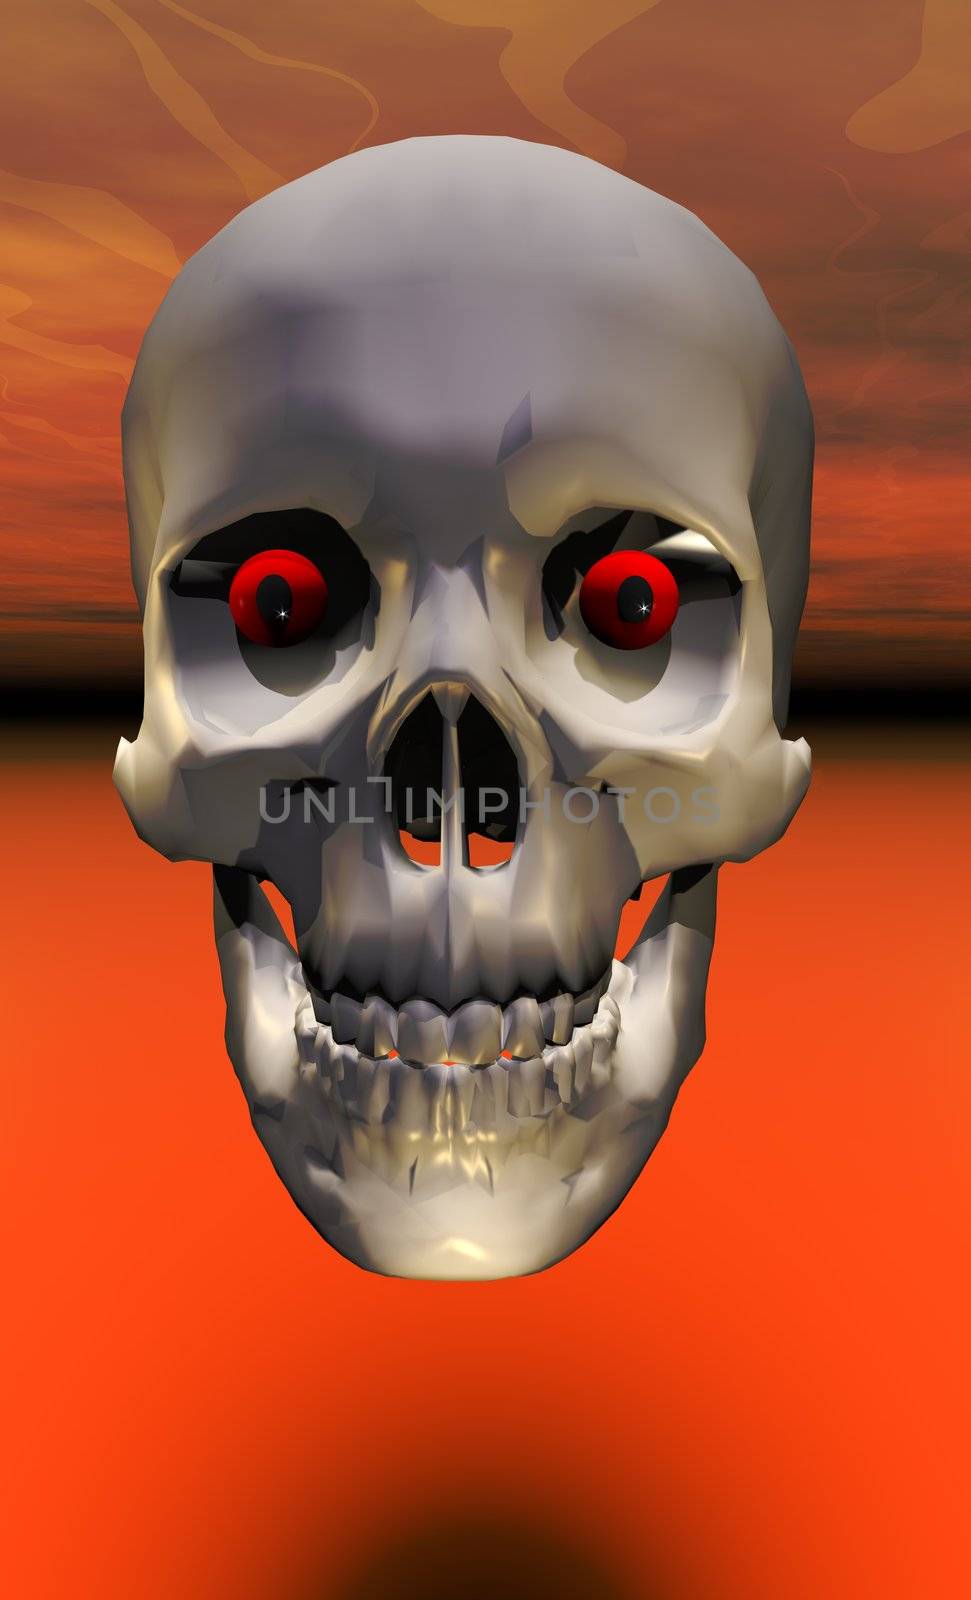 A halloween skull with red glowing eyes